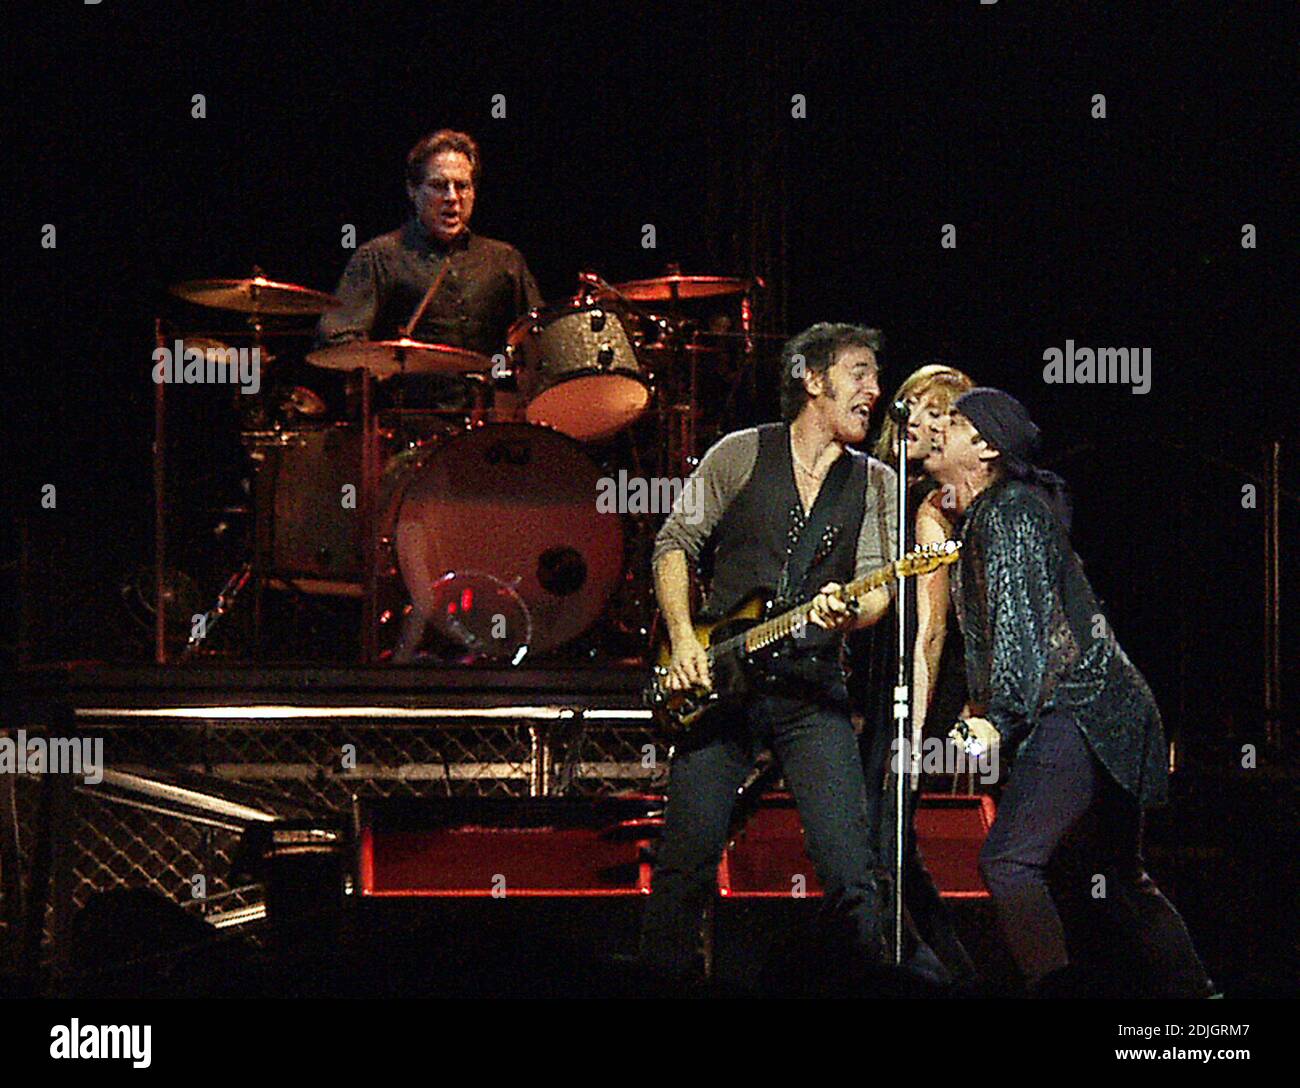 February 28: Max Weinberg, Bruce Springsteen, Patti Scialfa, and Little Steven Van Zandt of The E Street Band perform at The Arena At Gwinnett in Duluth, Georgia on February 28, 2003. CREDIT: Chris McKay / MediaPunch Stock Photo